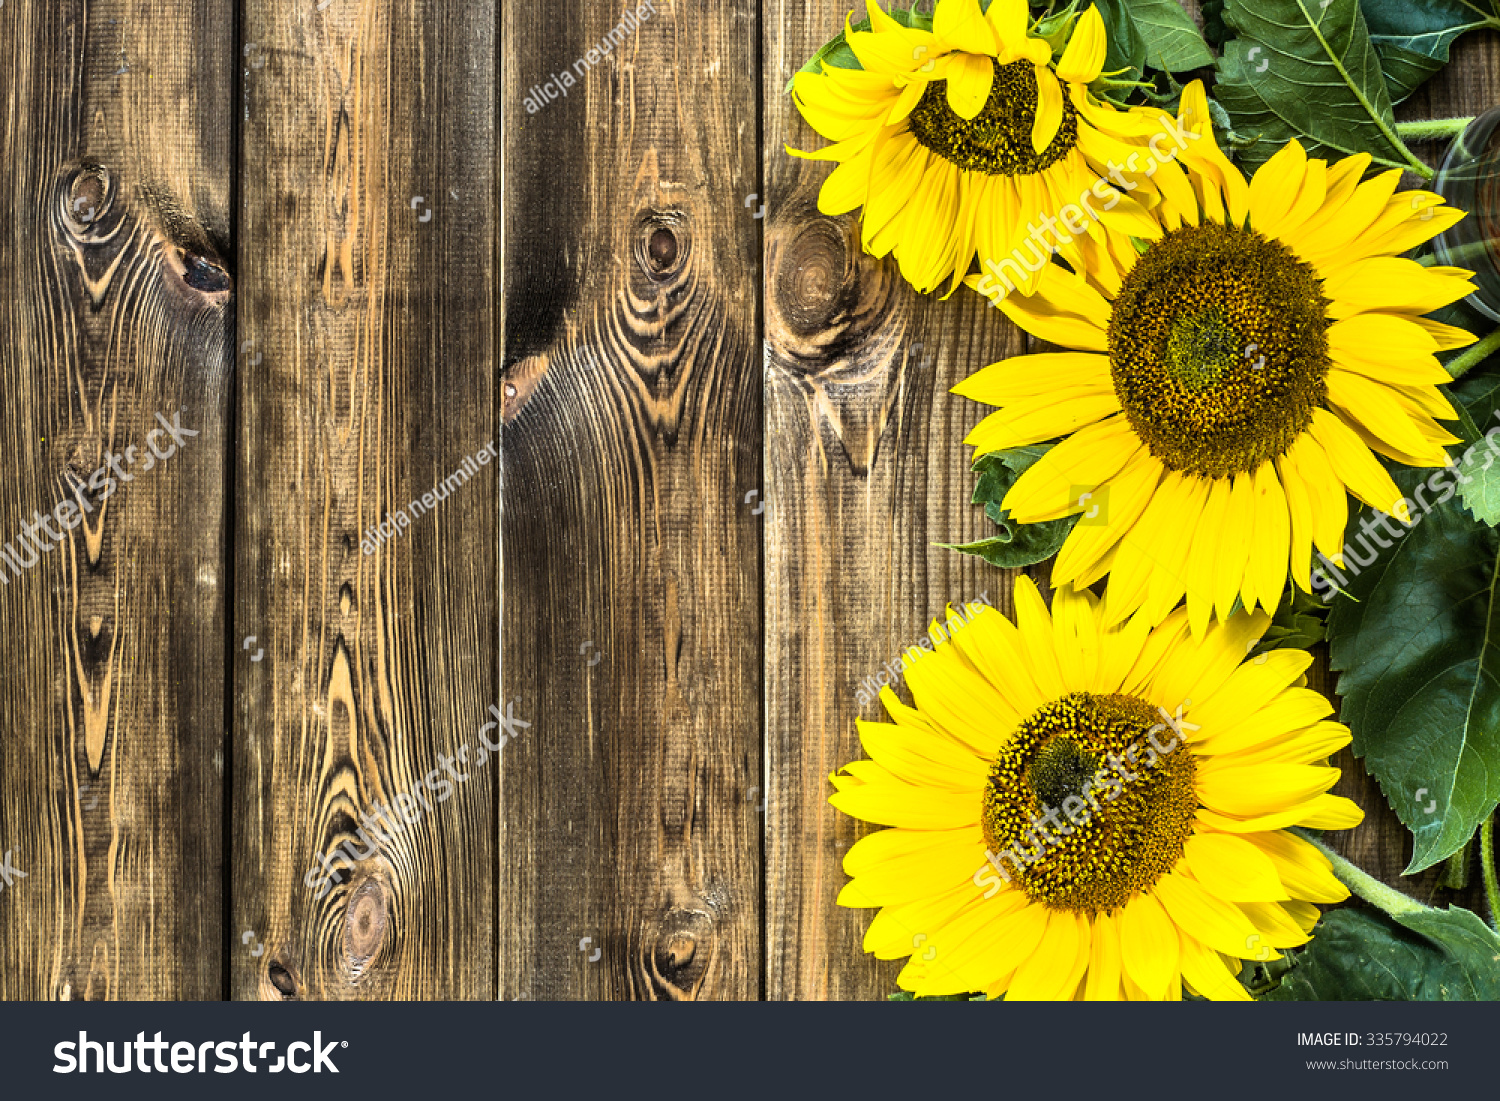 Beautiful Sunflowers On Rustic Wood Background Stock Photo (Edit Now ...